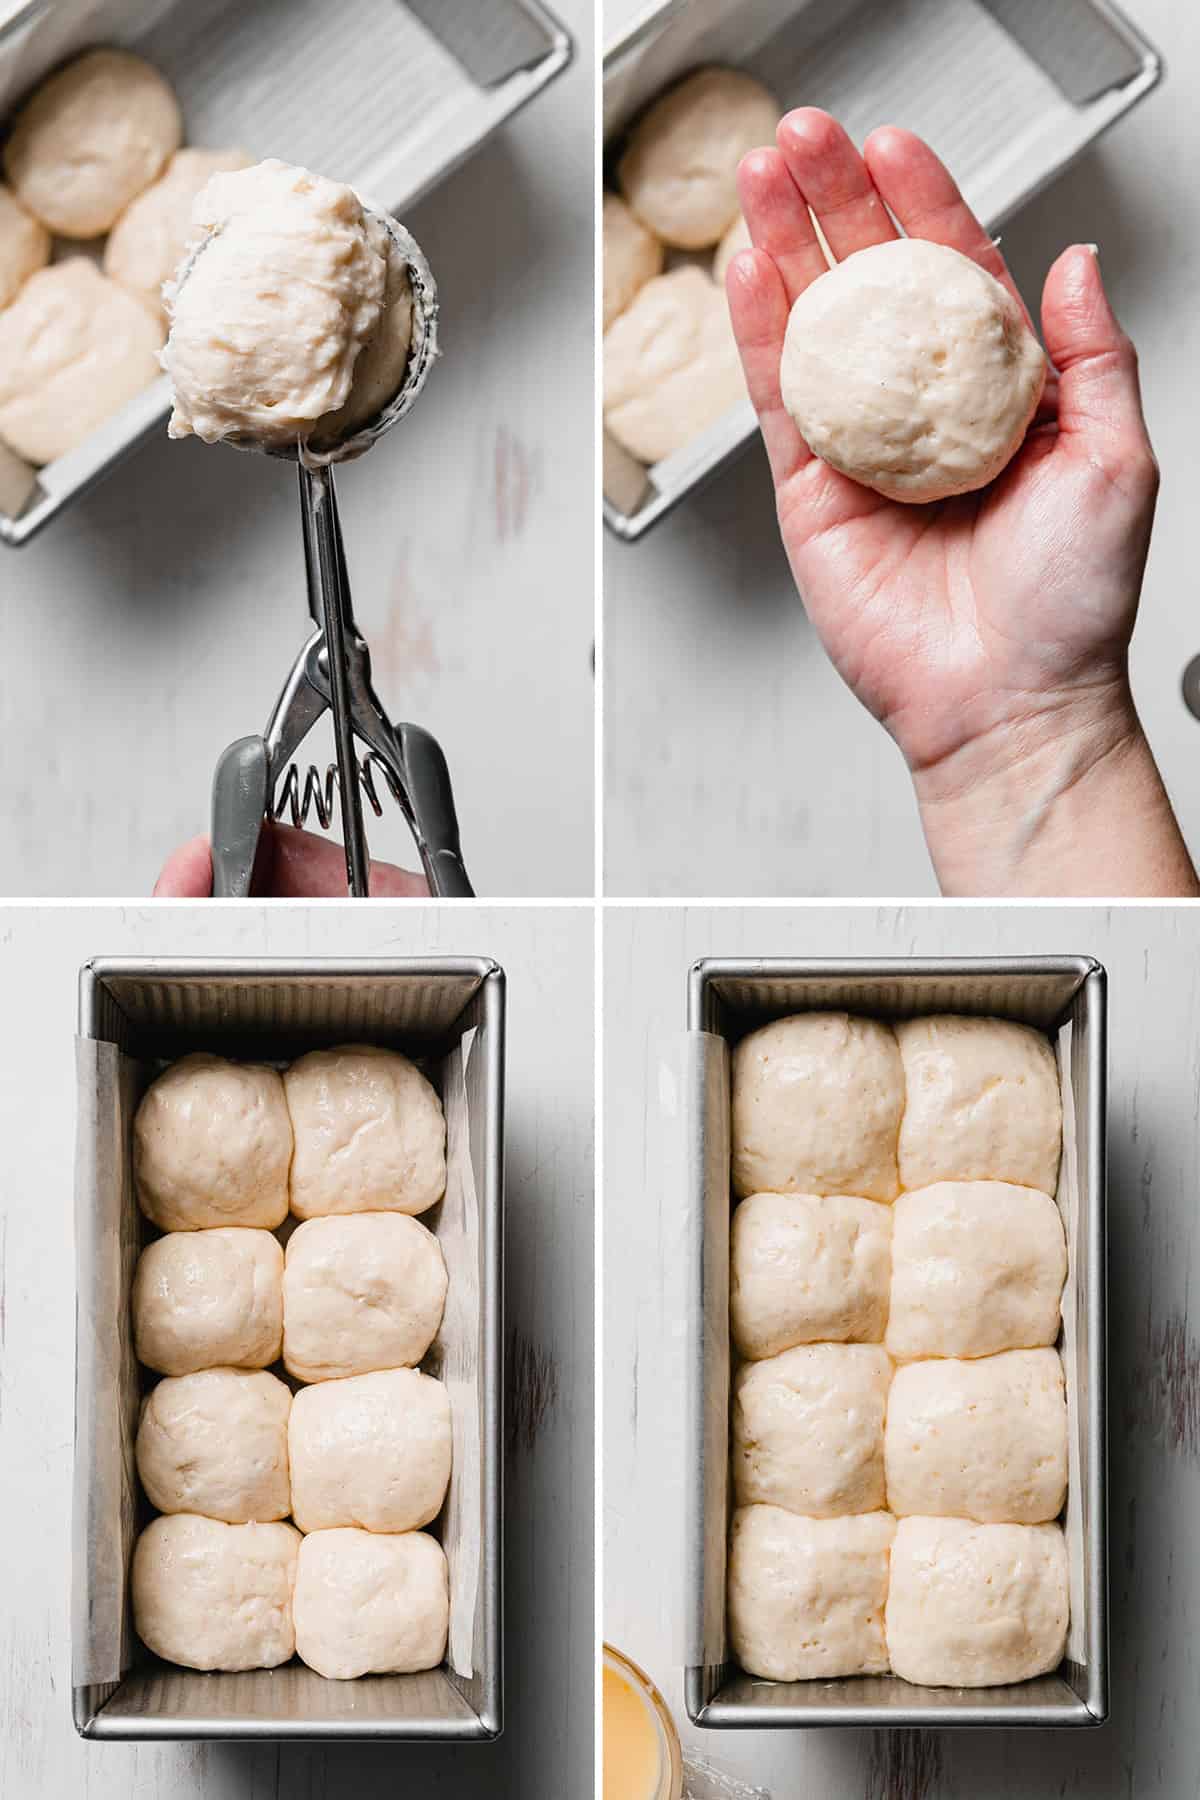 Portioning the dough, rolling it into a ball, dough in a loaf pan.